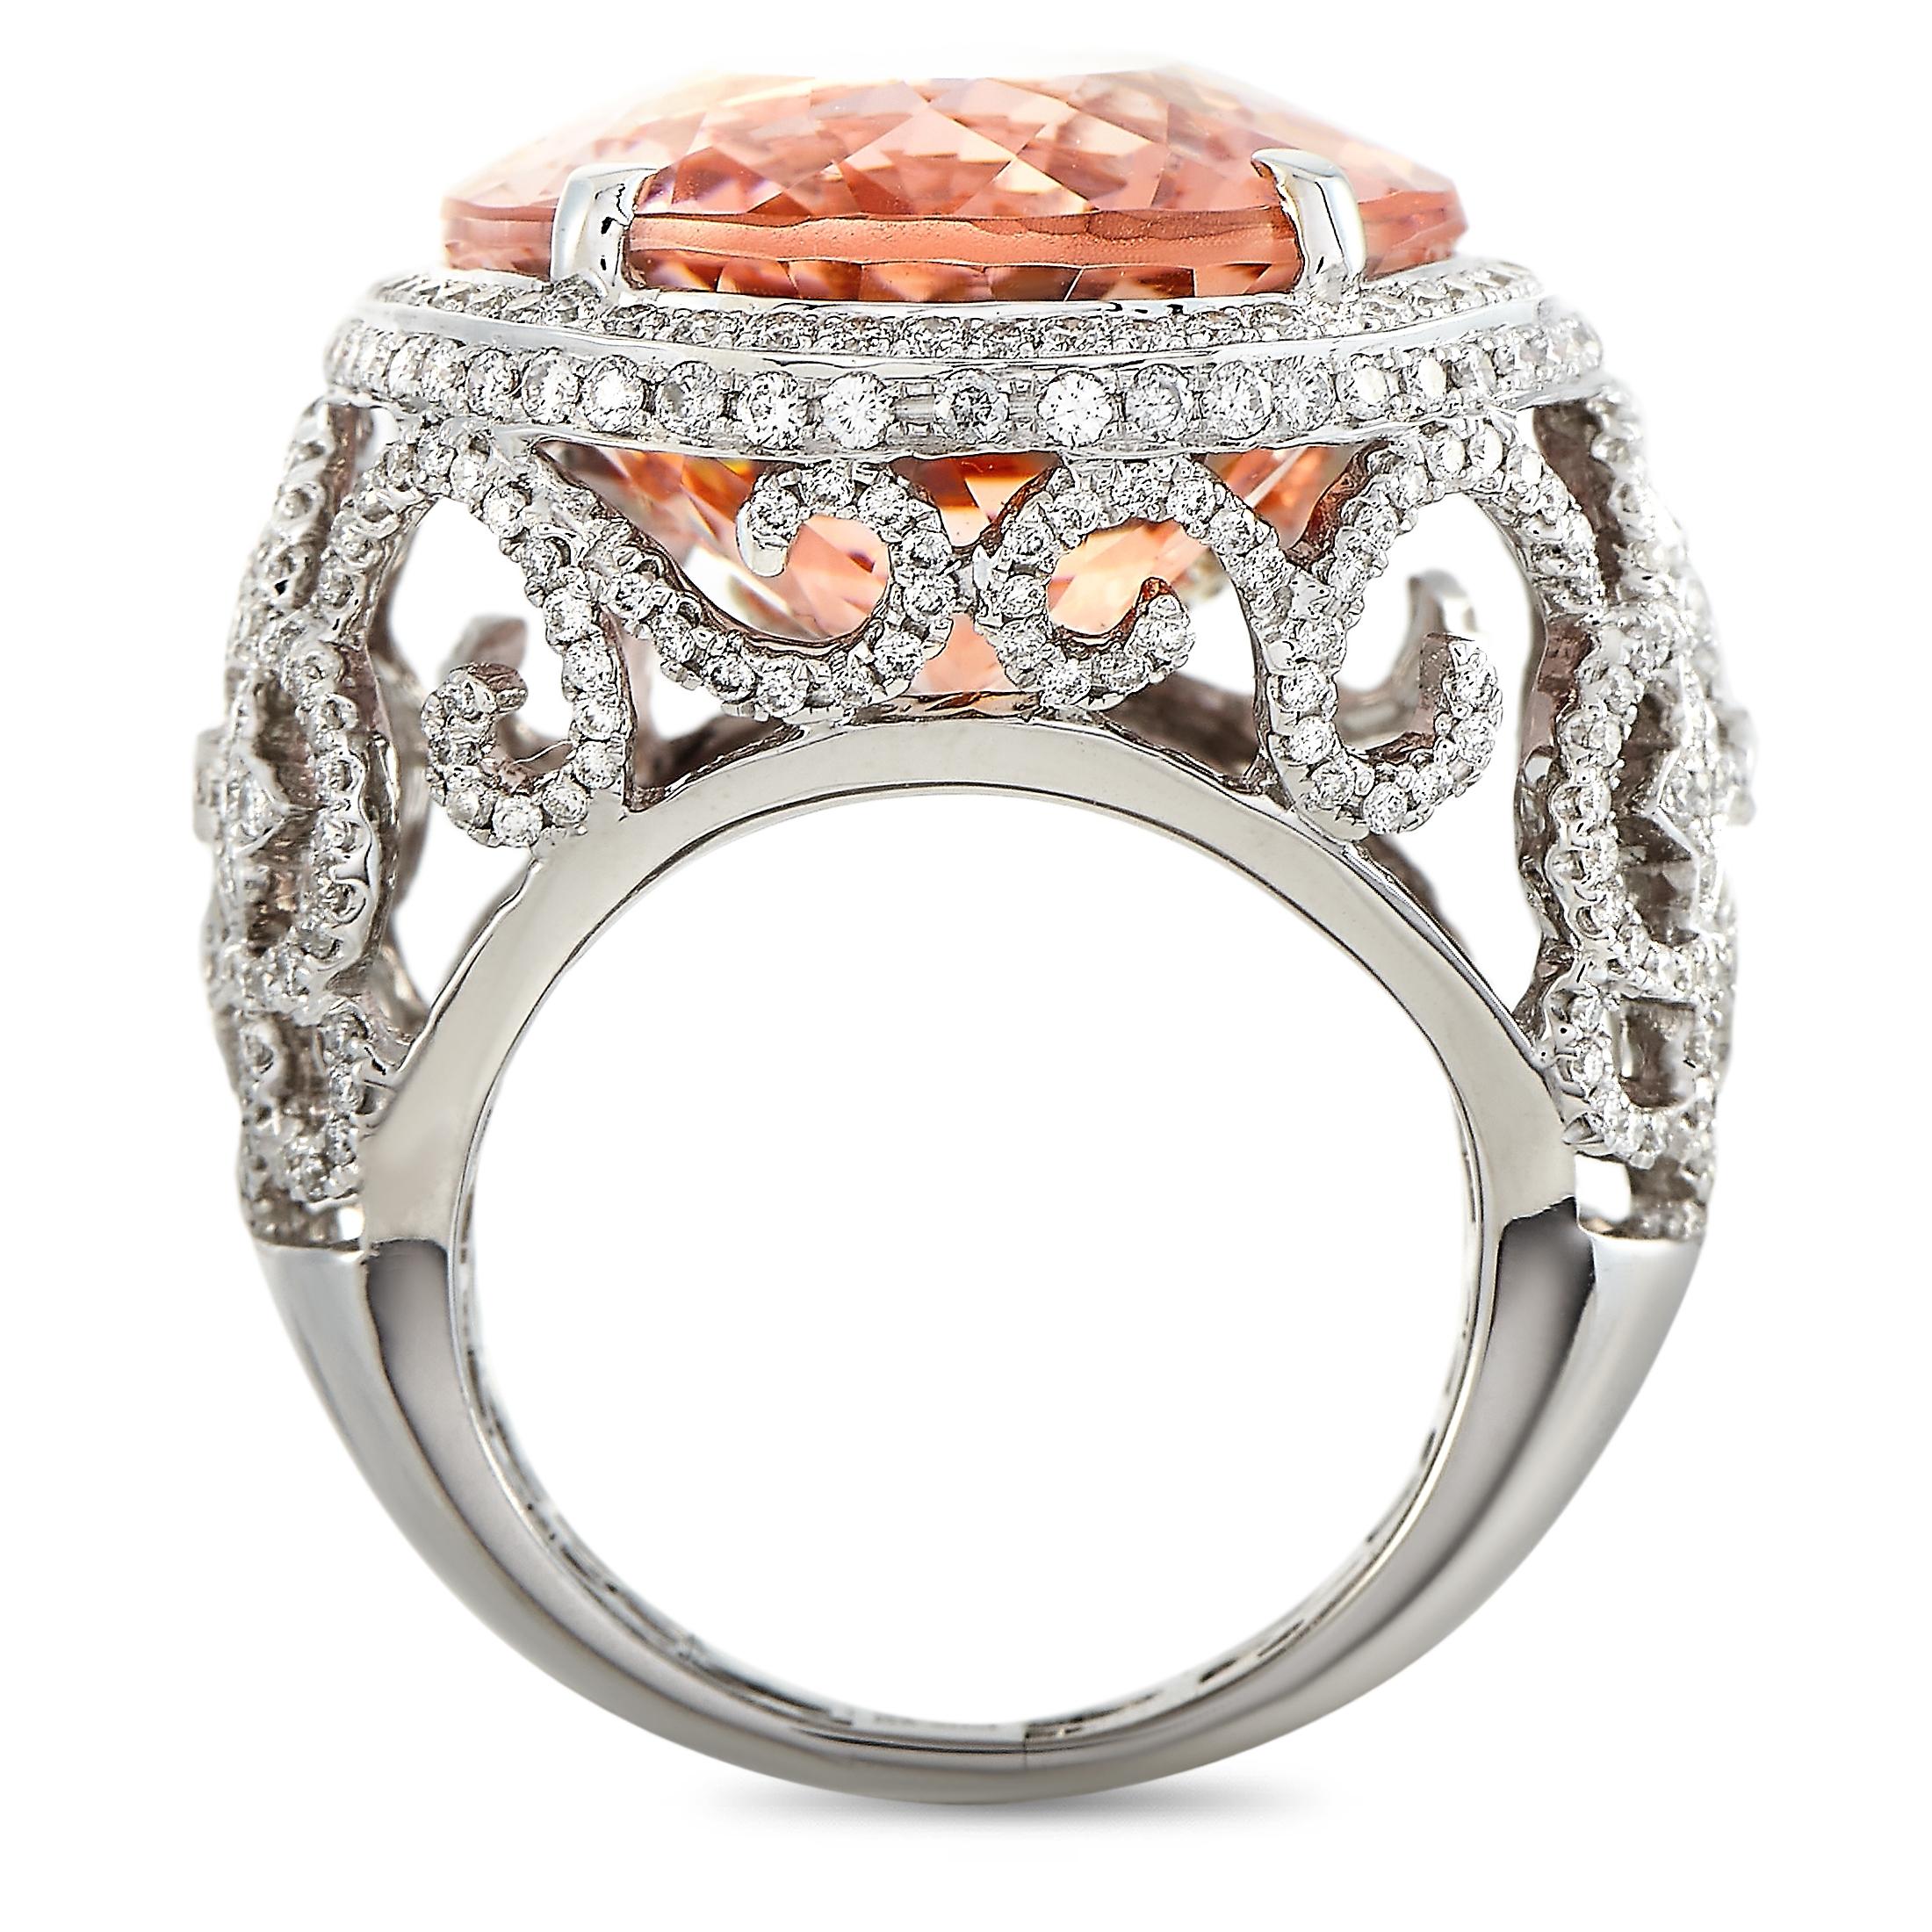 This LB Exclusive ring is crafted from platinum and weighs 22.5 grams, boasting band thickness of 6 mm and top height of 12 mm, while top dimensions measure 27 by 25 mm. The ring is set with a 33.46 ct morganite and a total of 2.20 carats of